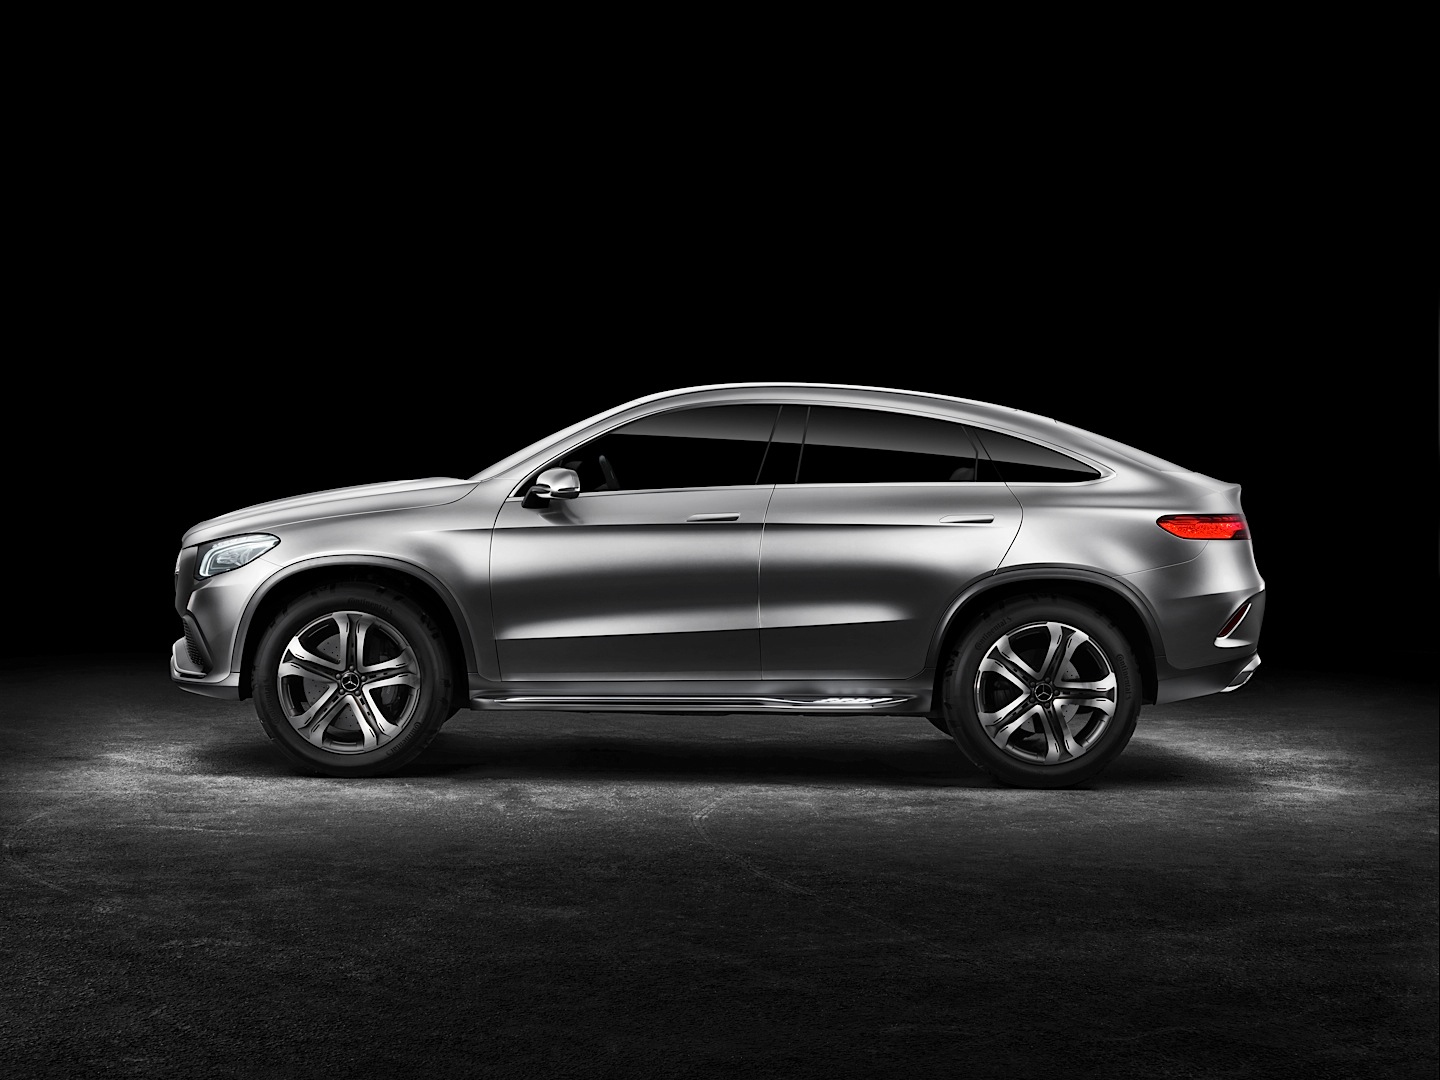 Mercedes-Benz Concept Coupe SUV Officially Revealed - autoevolution